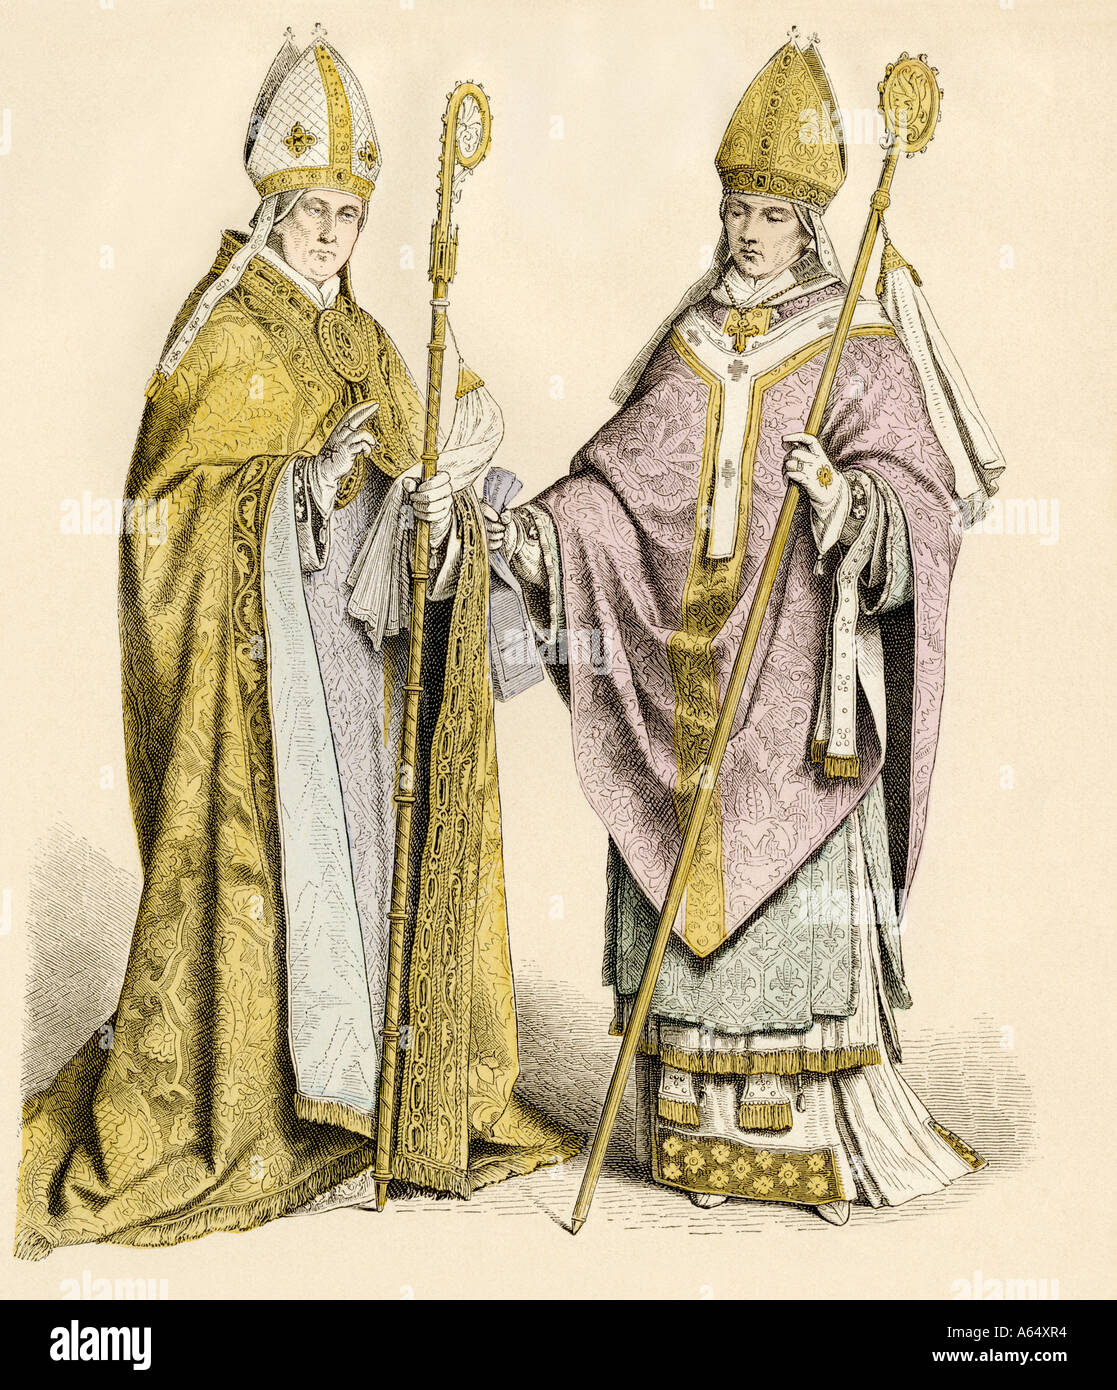 Roman Catholic bishop in a choir robe left and a bishop in his vestments for presiding over Mass 1500s and 1600s. Hand-colored print Stock Photo